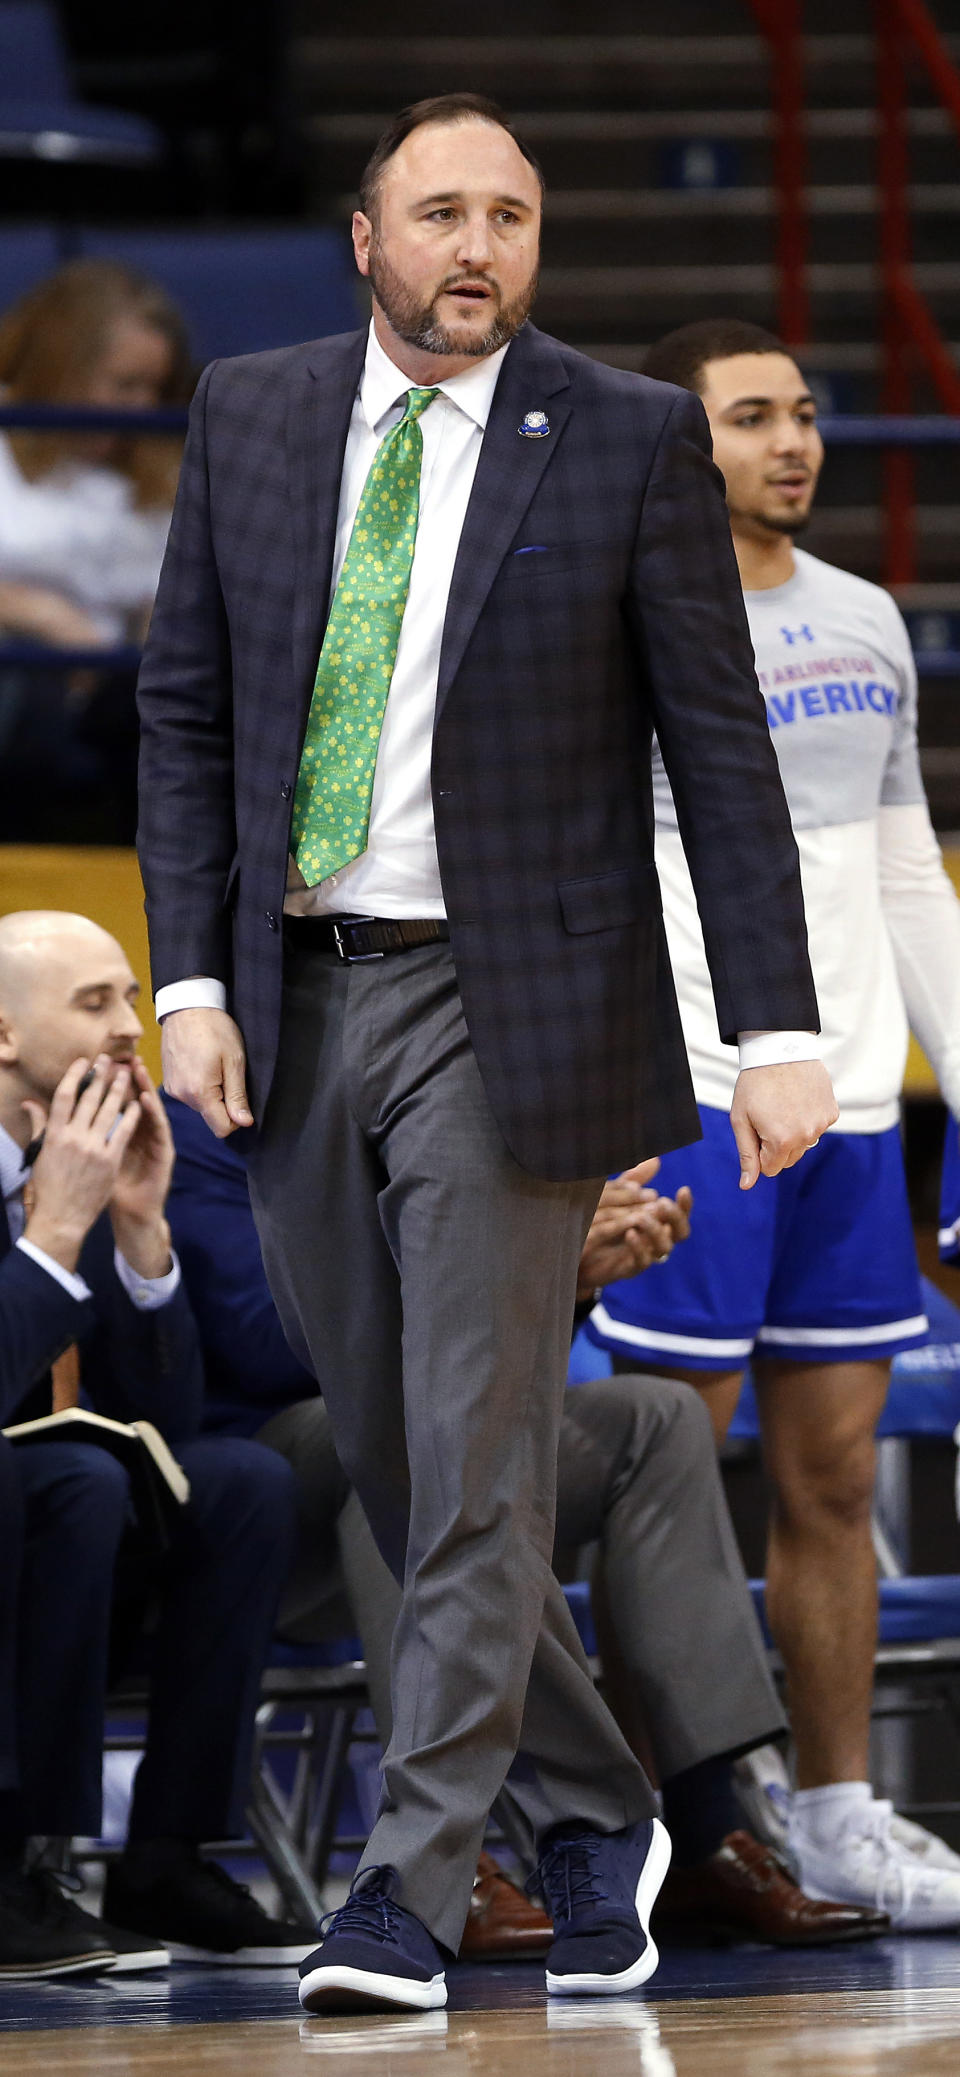 Texas-Arlington coach Chris Ogden reacts to a call during the first half of the team's NCAA college basketball game against Georgia State for the championship of the Sun Belt Conference men's tournament in New Orleans, Sunday, March 17, 2019. Georgia State won 73-64. (AP Photo/Tyler Kaufman)